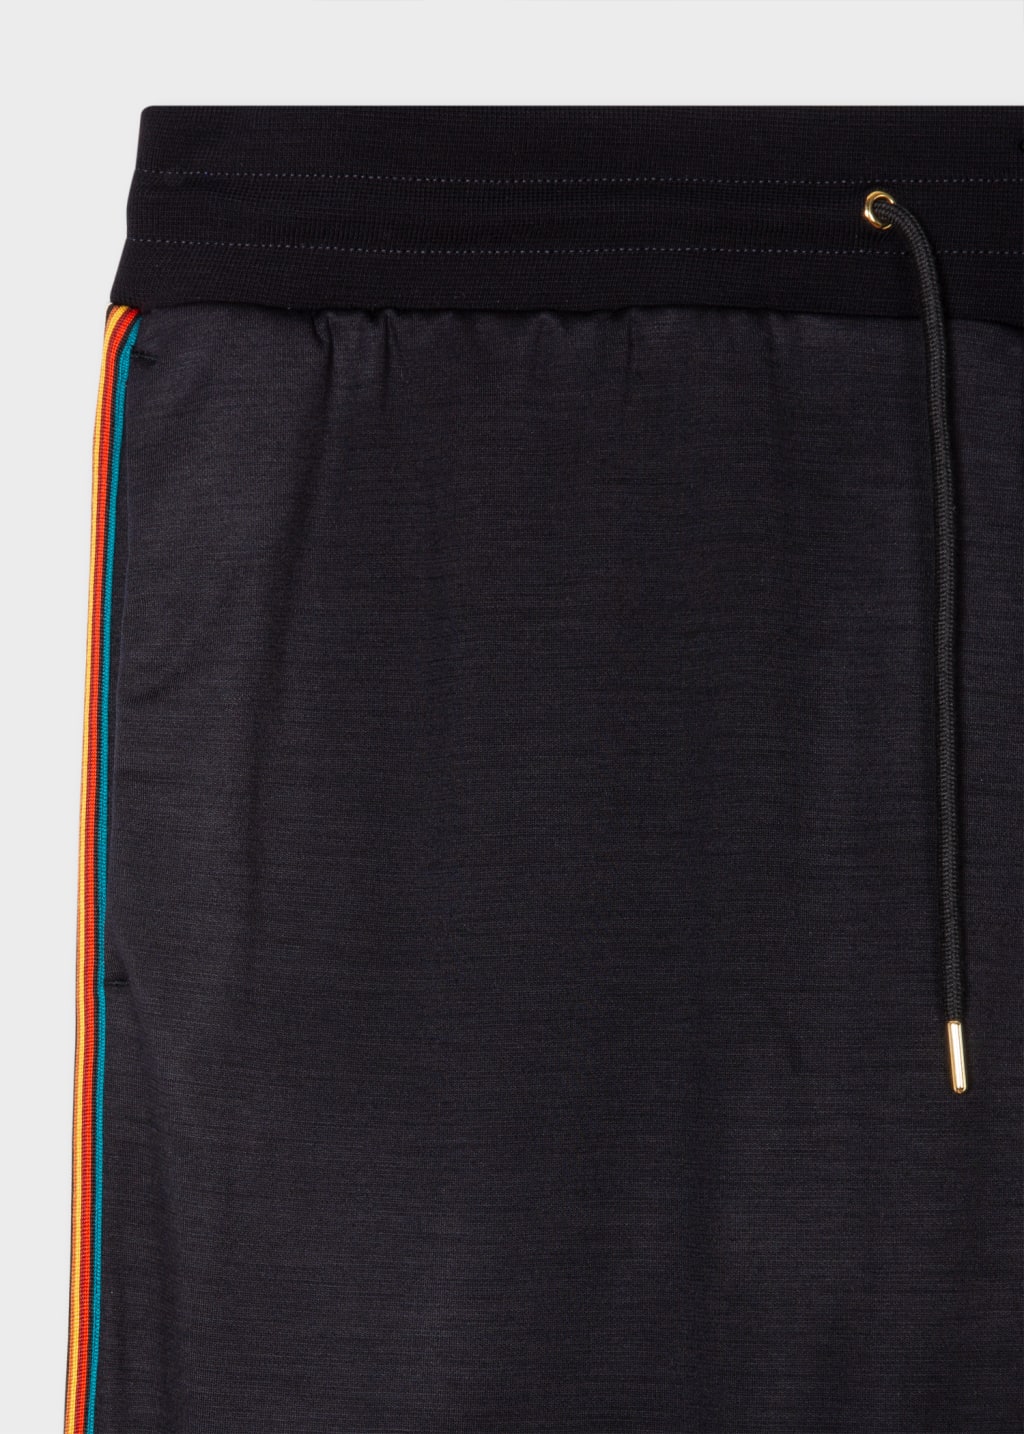 Detail View - Tapered-Fit Navy Washable Wool 'Signature Stripe' Sweatpants Paul Smith